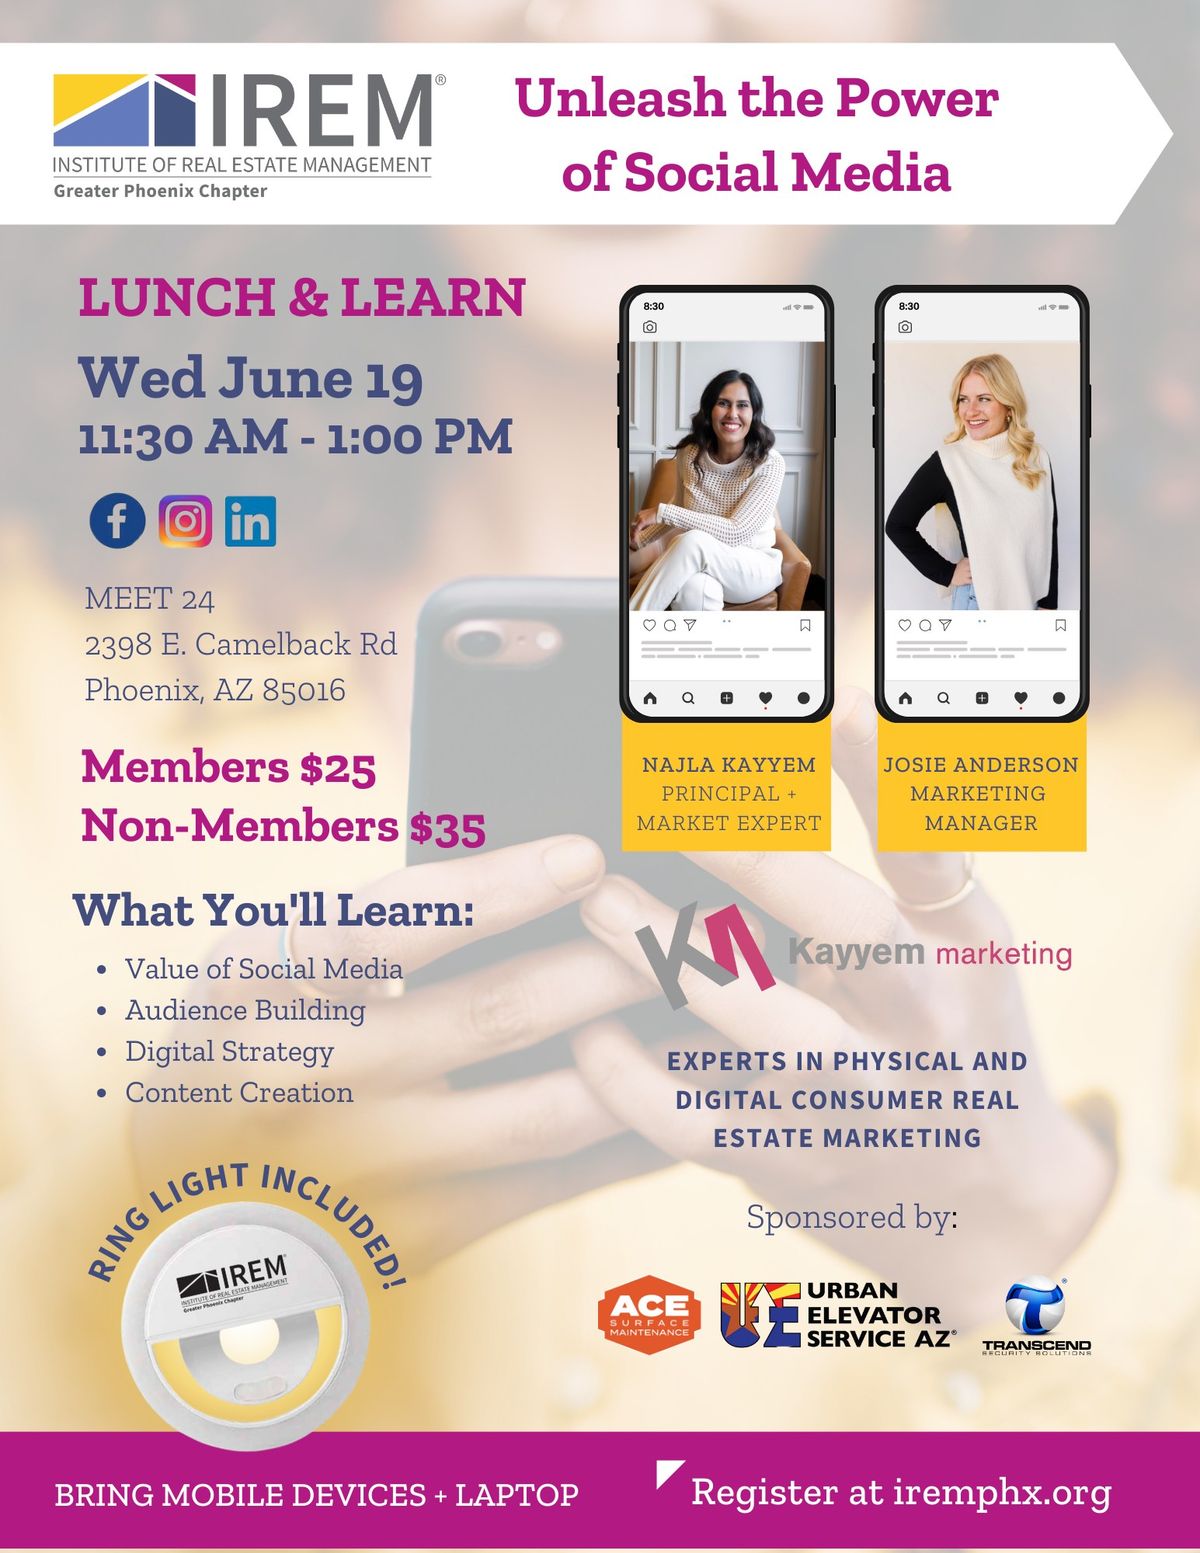 IREM Lunch & Learn Unleash the Power of Social Media